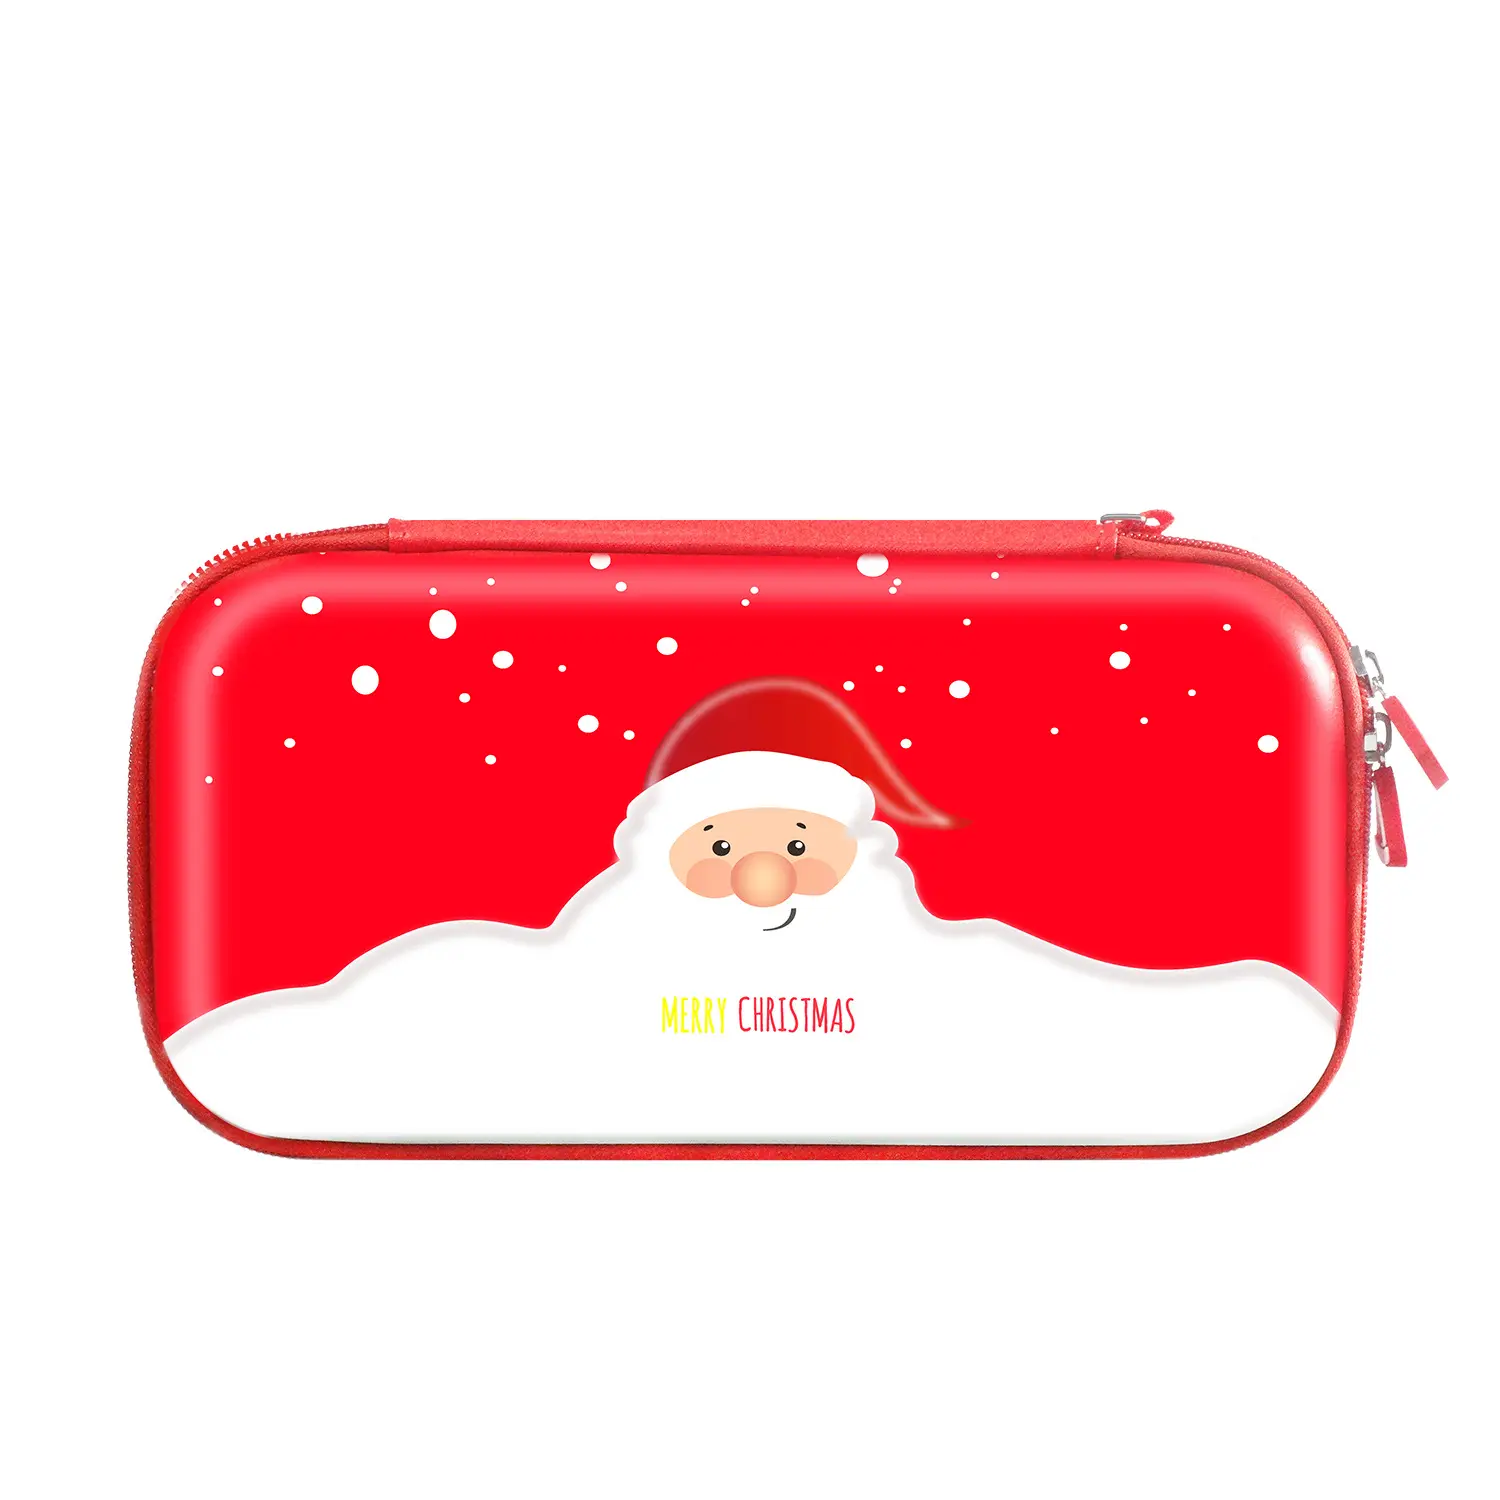 Christmas Theme Design Carrying Bag Protective EVA Case Storage Bag Game Accessories For Nintendo Switch